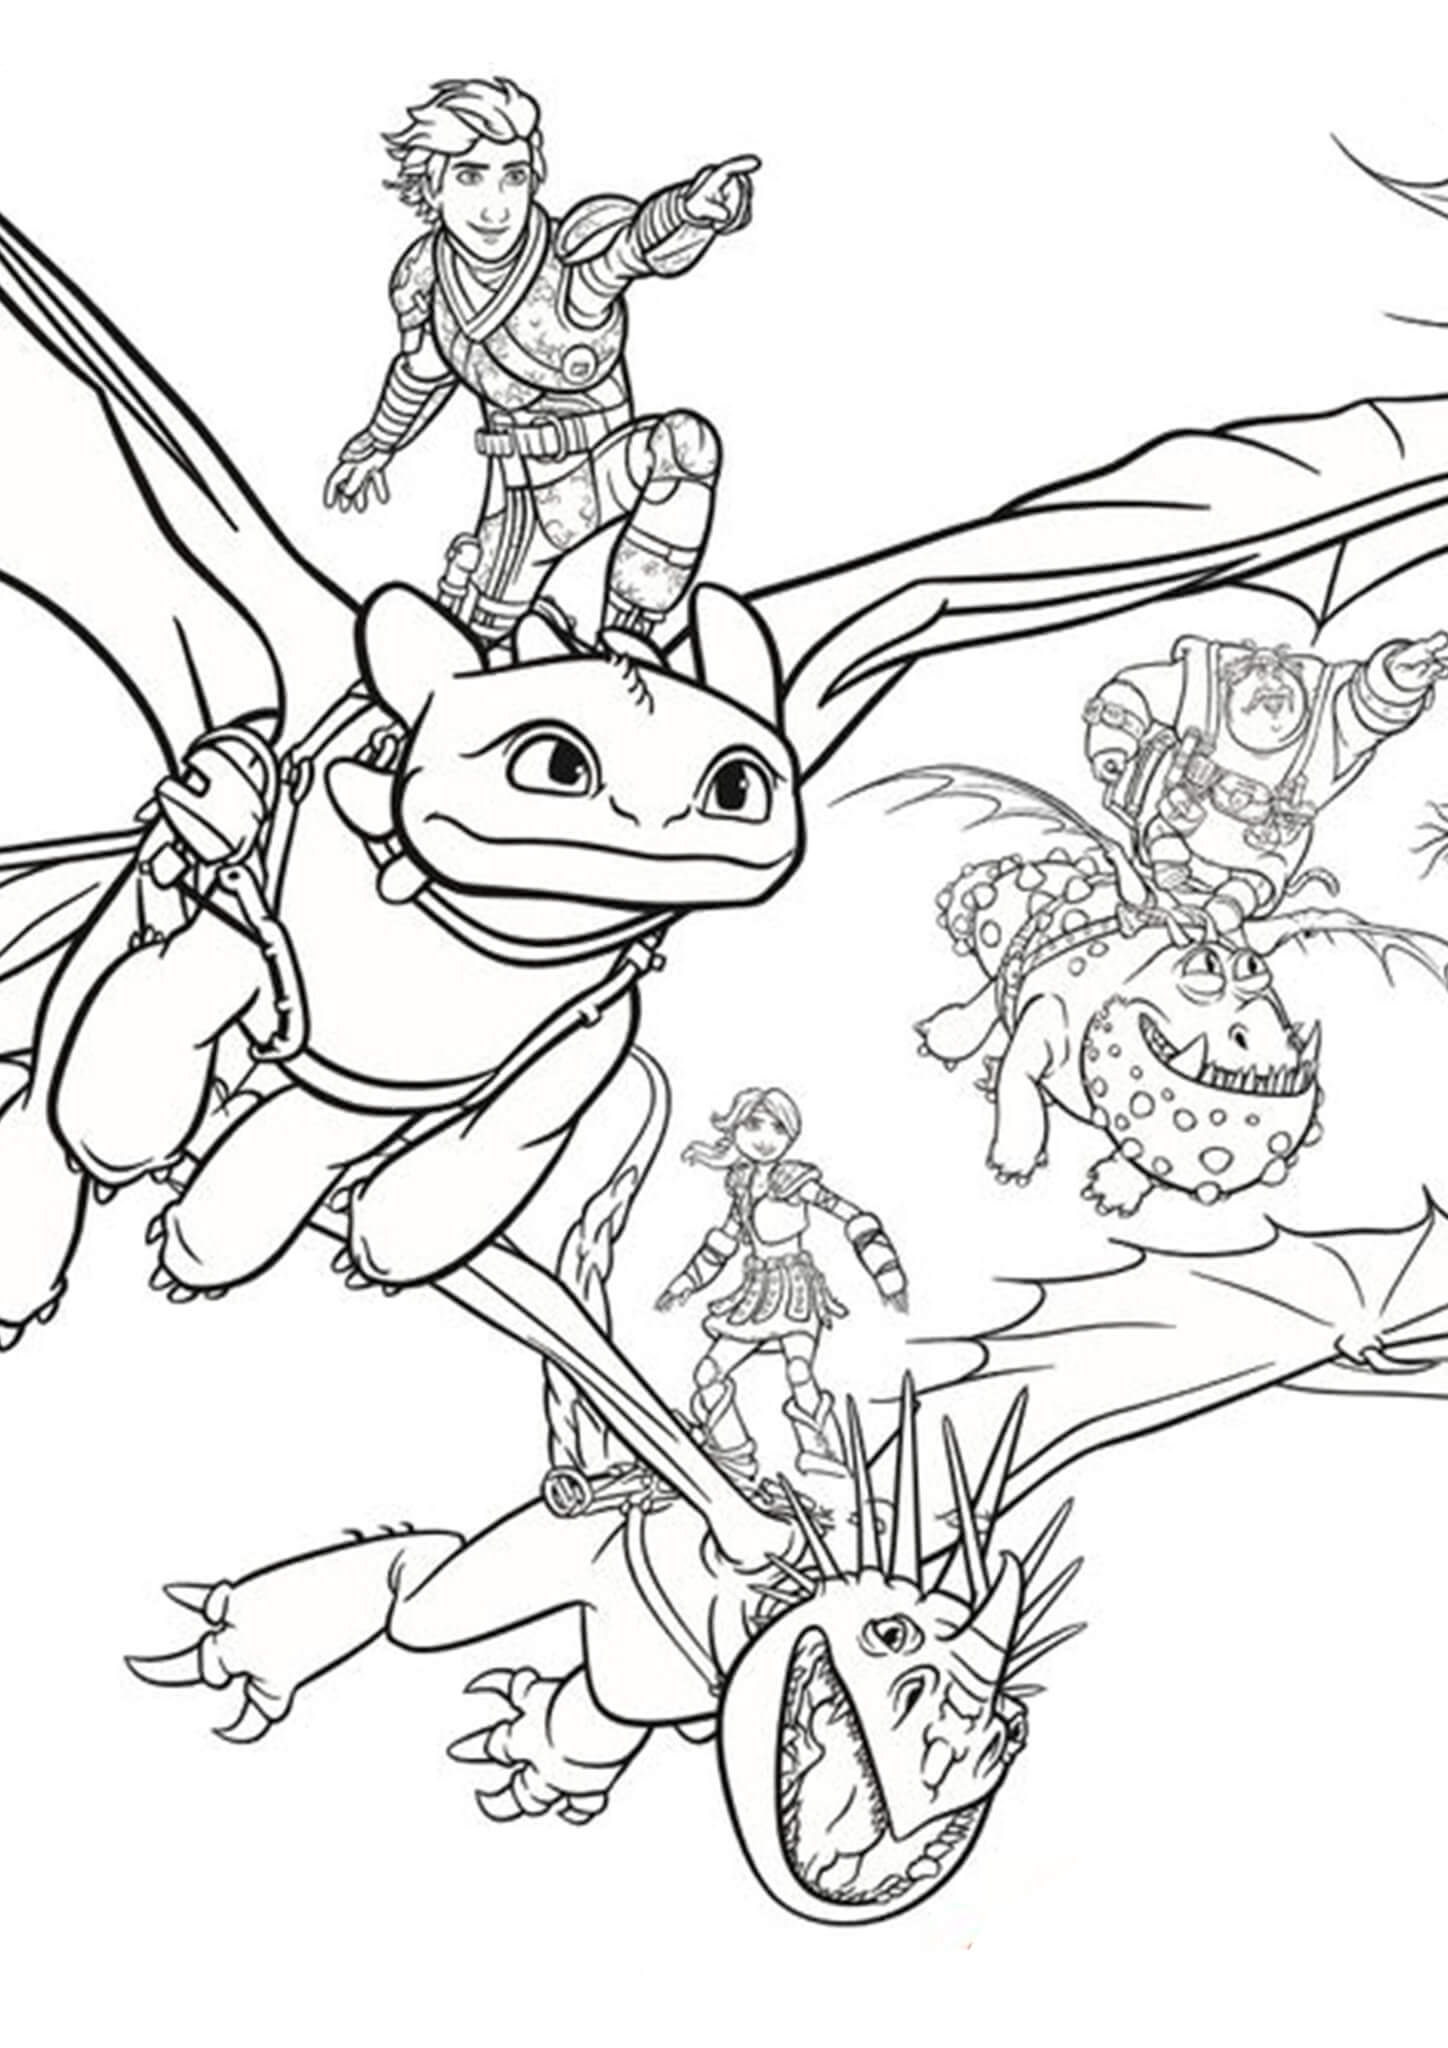 Free easy to print how to train your dragon coloring pages